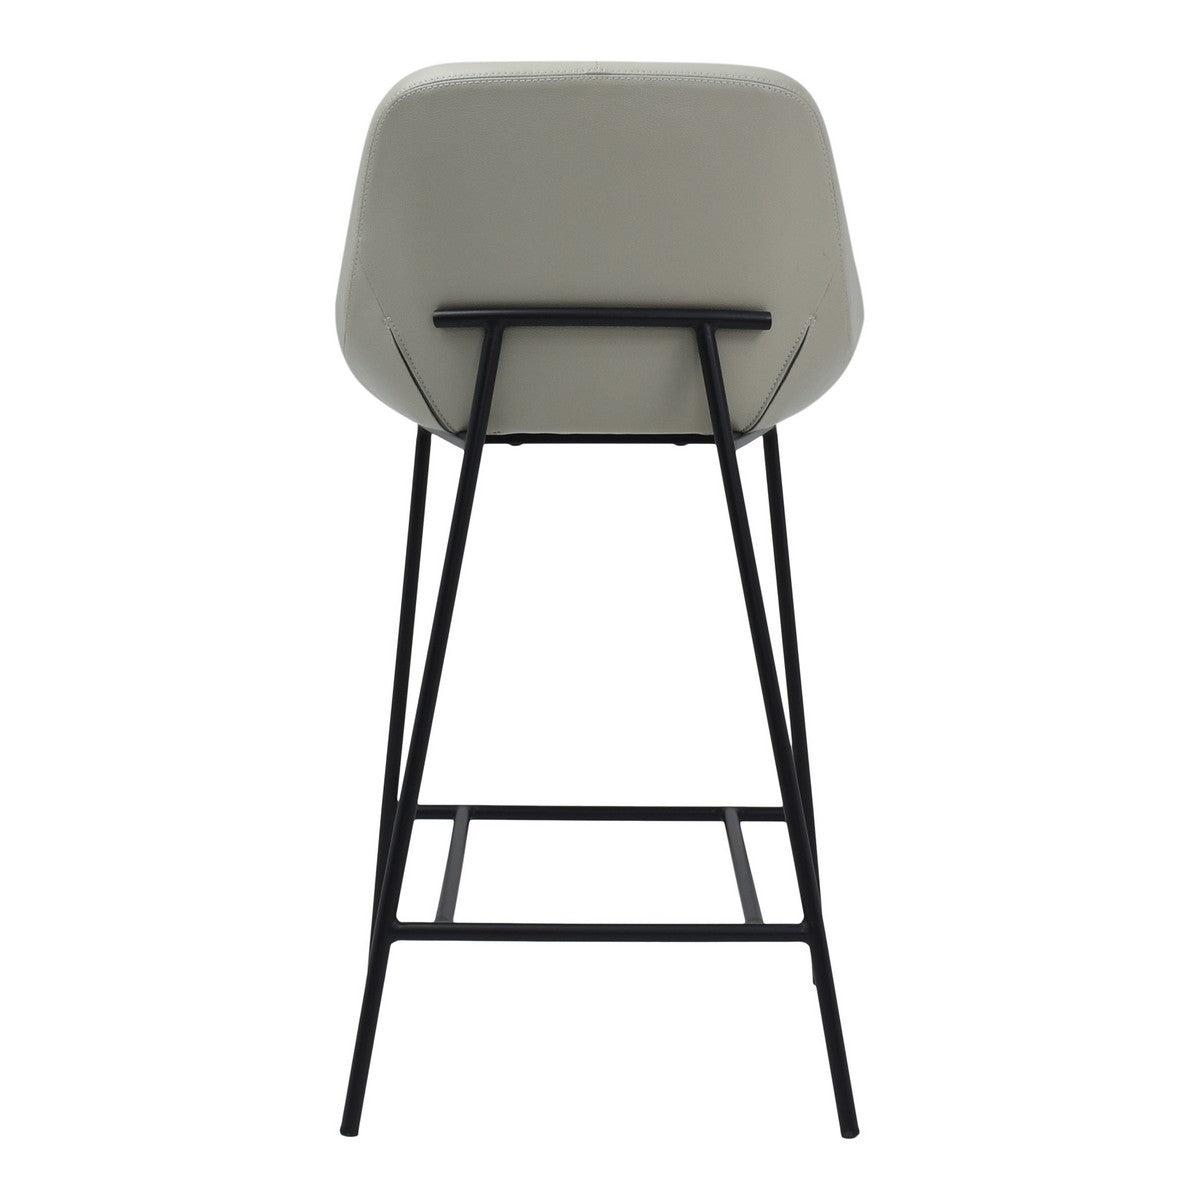 Moe's Home Collection Shelby Counter Stool Beige - EJ-1038-34